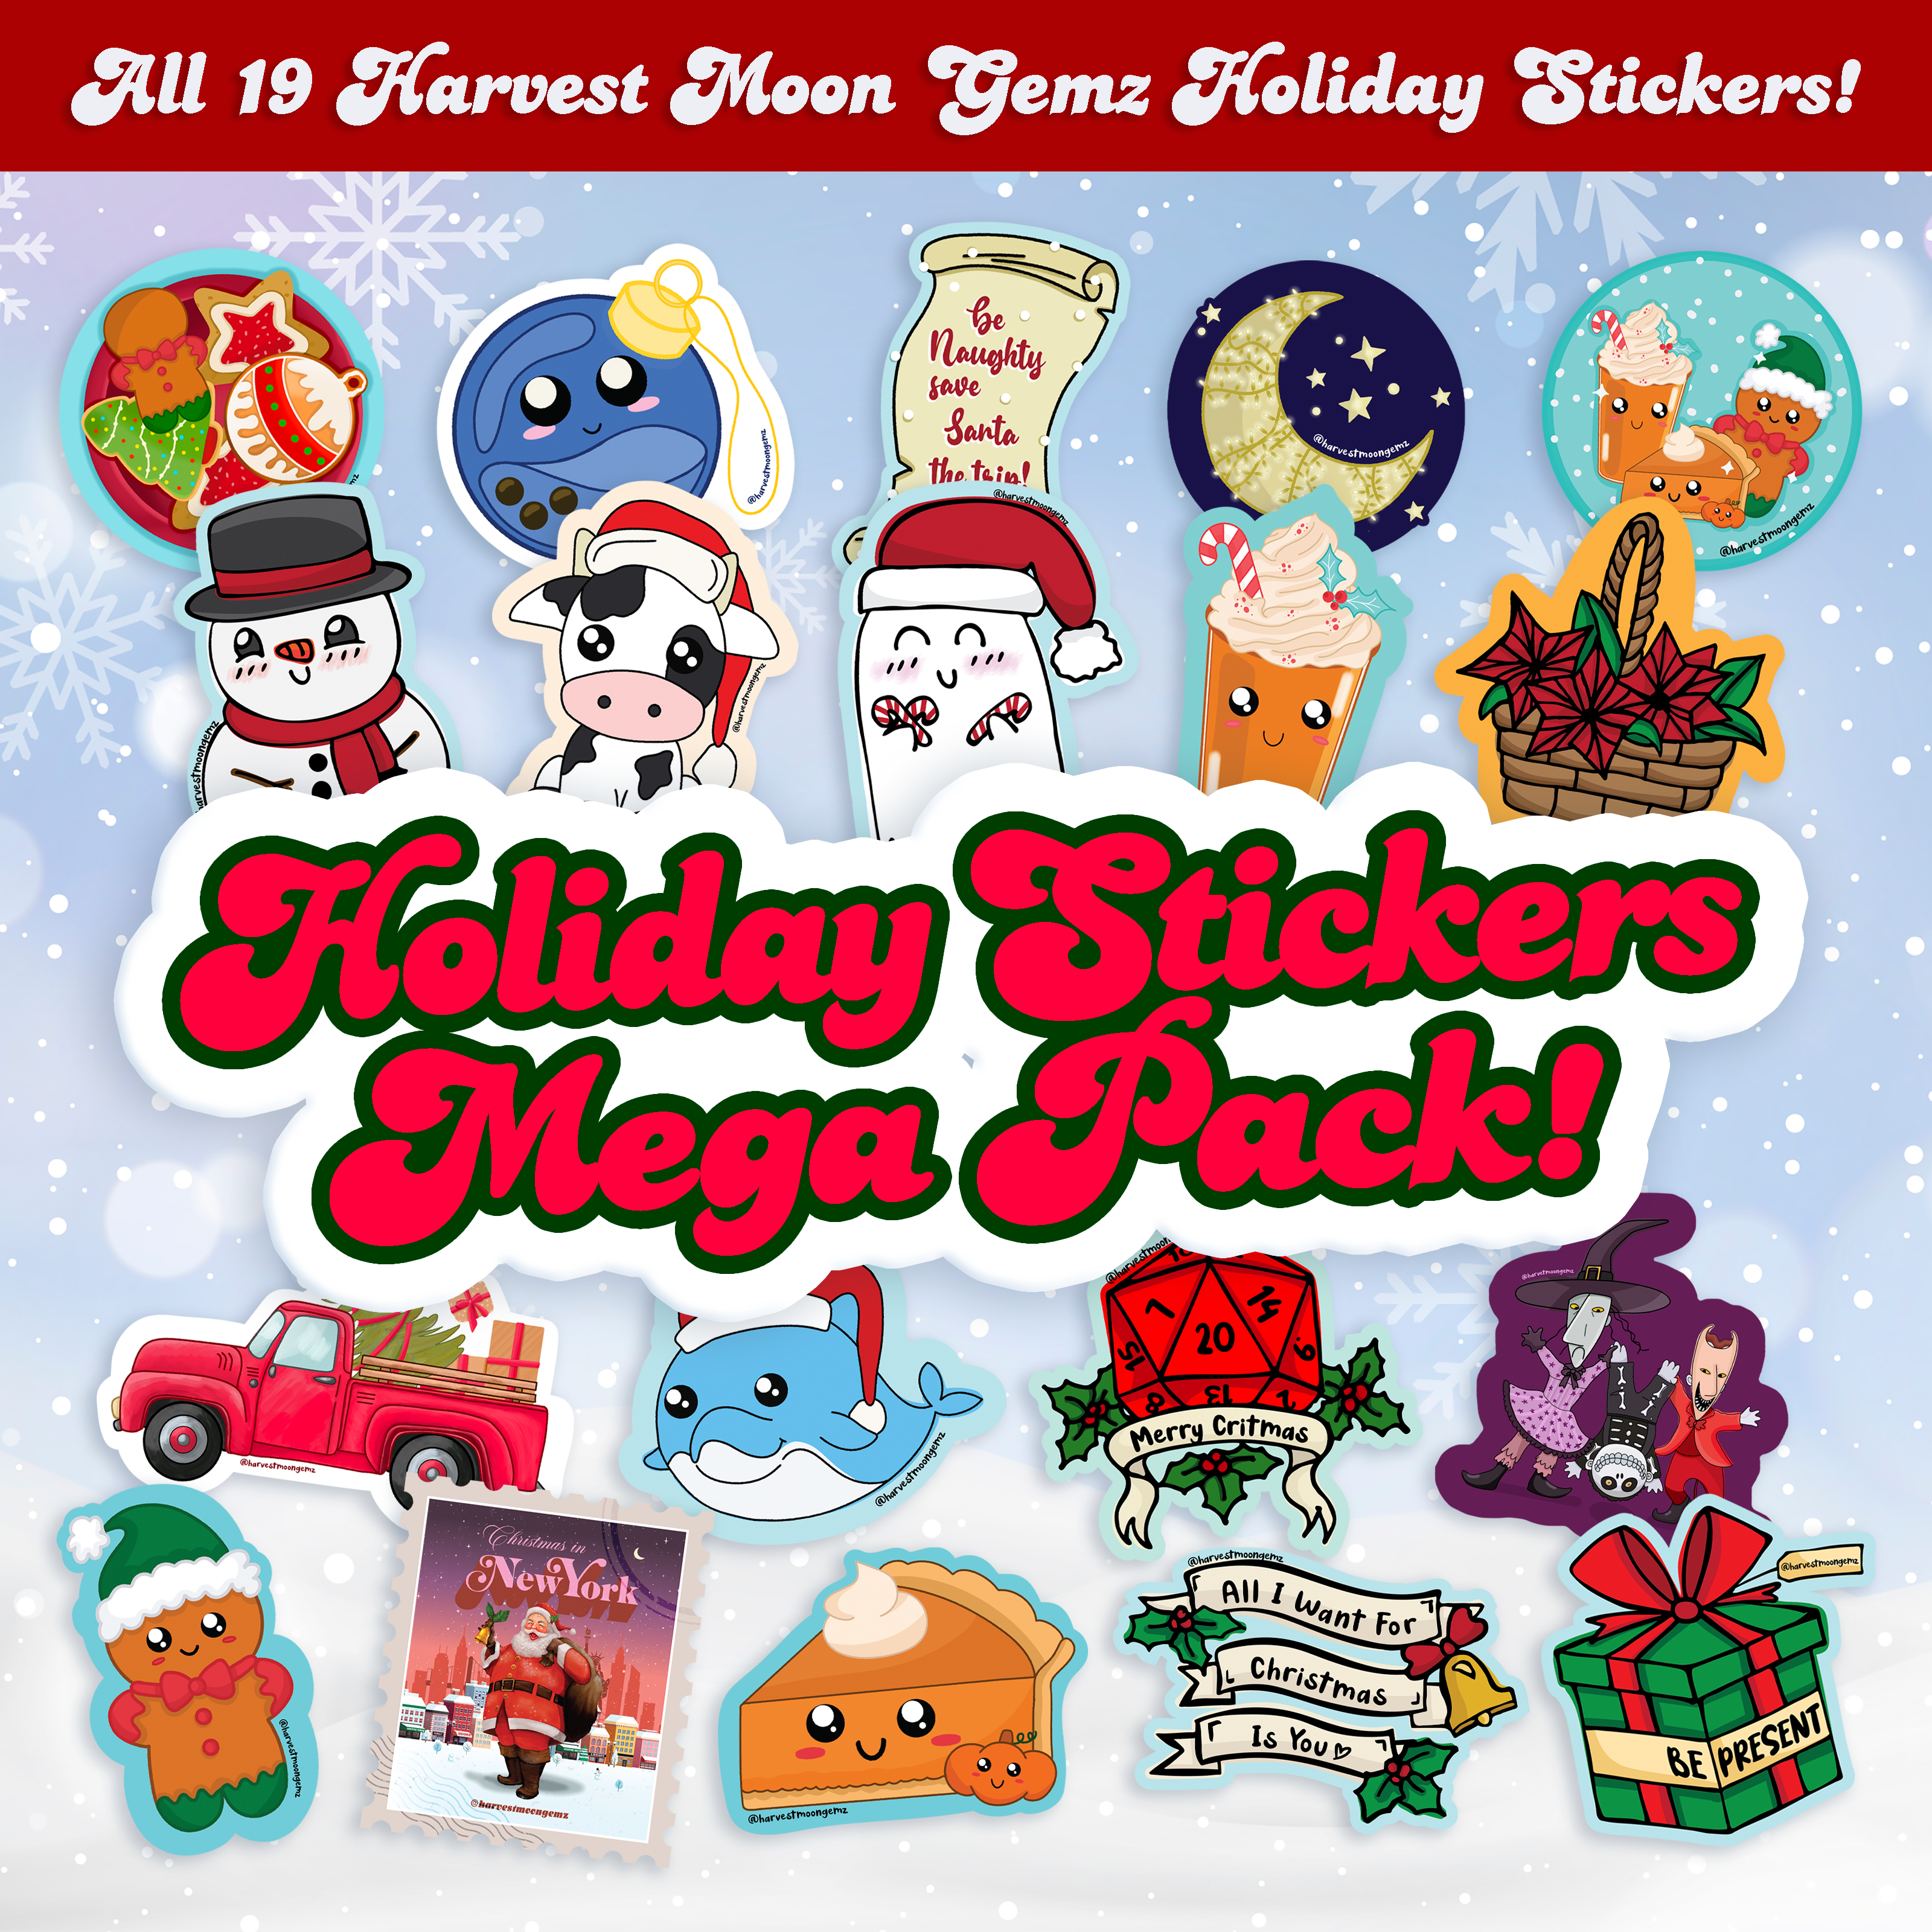 Holiday Stickers Mega Pack